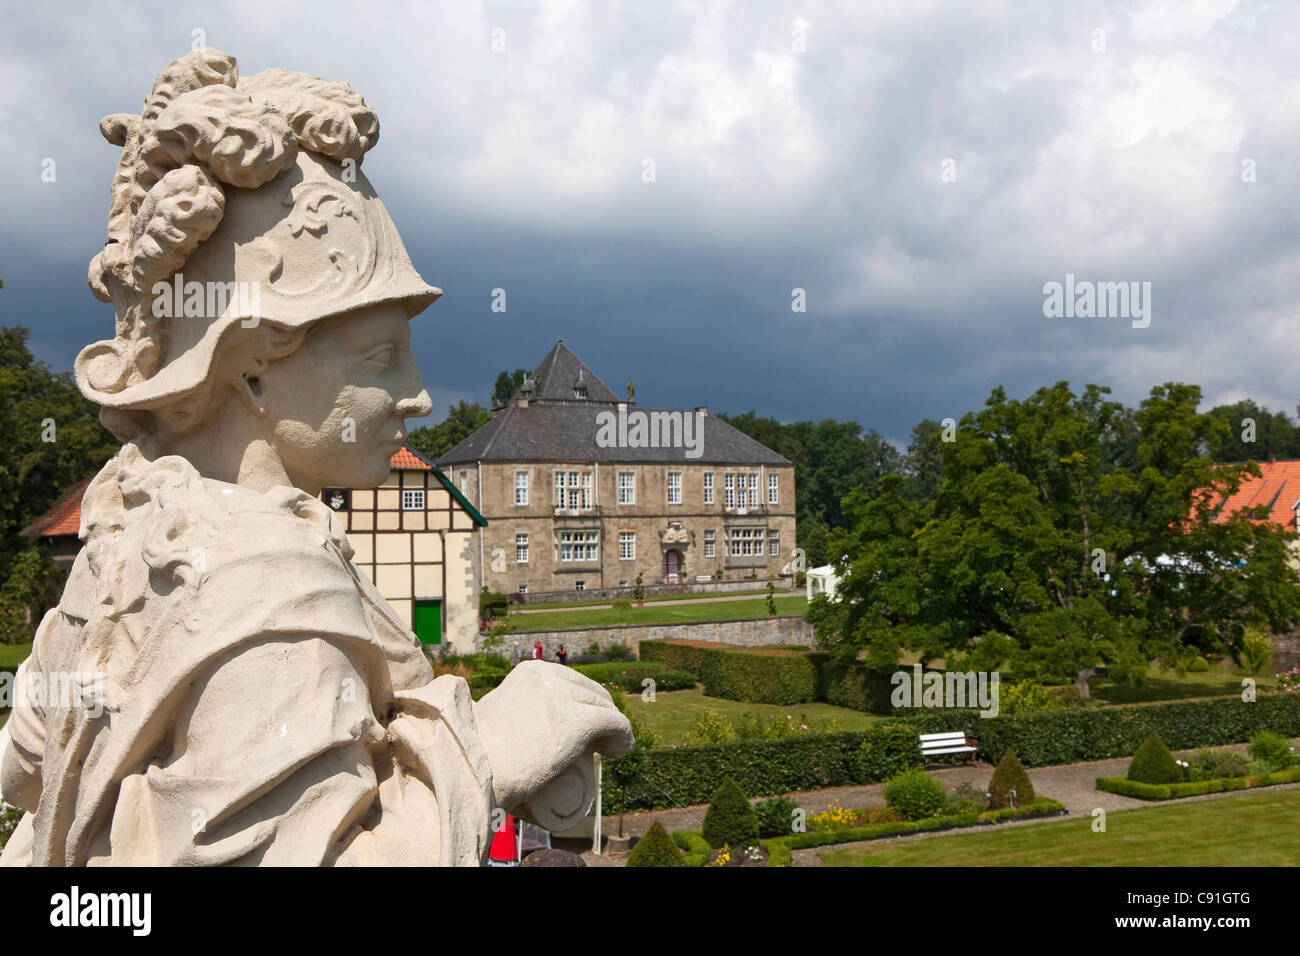 Gesmold castle and castle grounds, sculpture in the foreground, black clouds, Gesmold, Meller, Lower Saxony, Germany Stock Photo